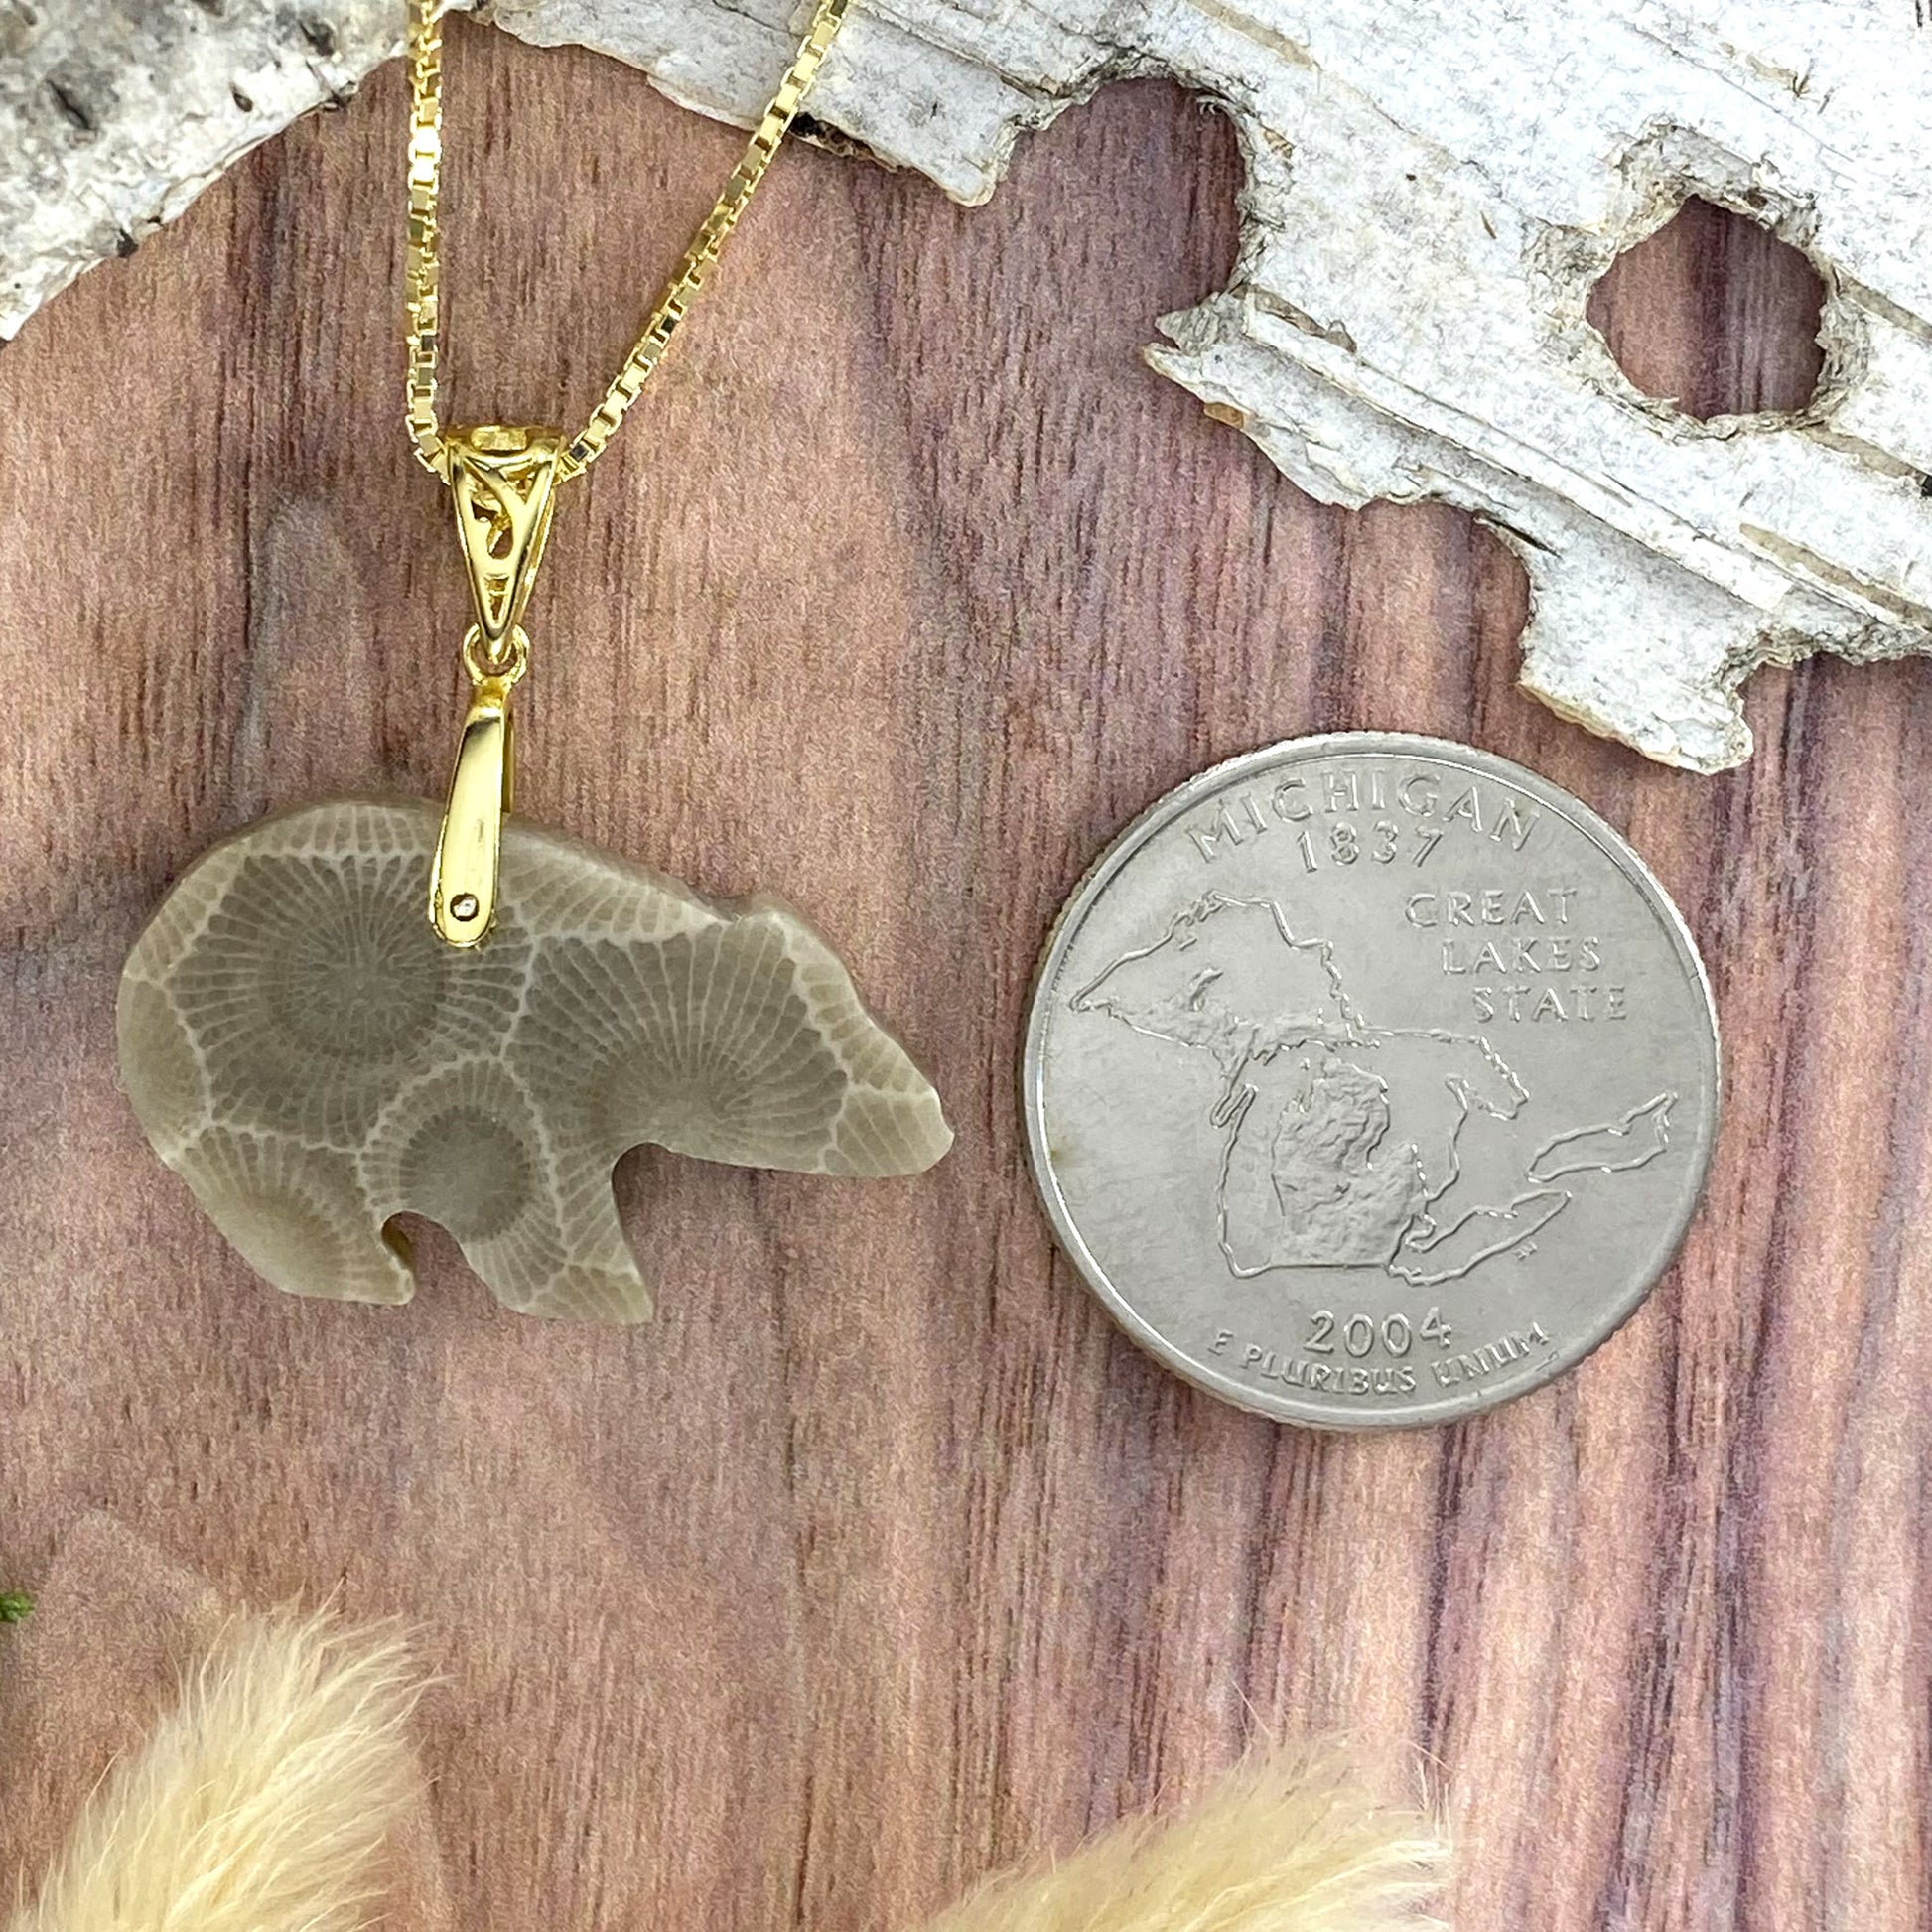 Petoskey Stone Bear Pendant Necklace Back View - Stone Treasures by the Lake